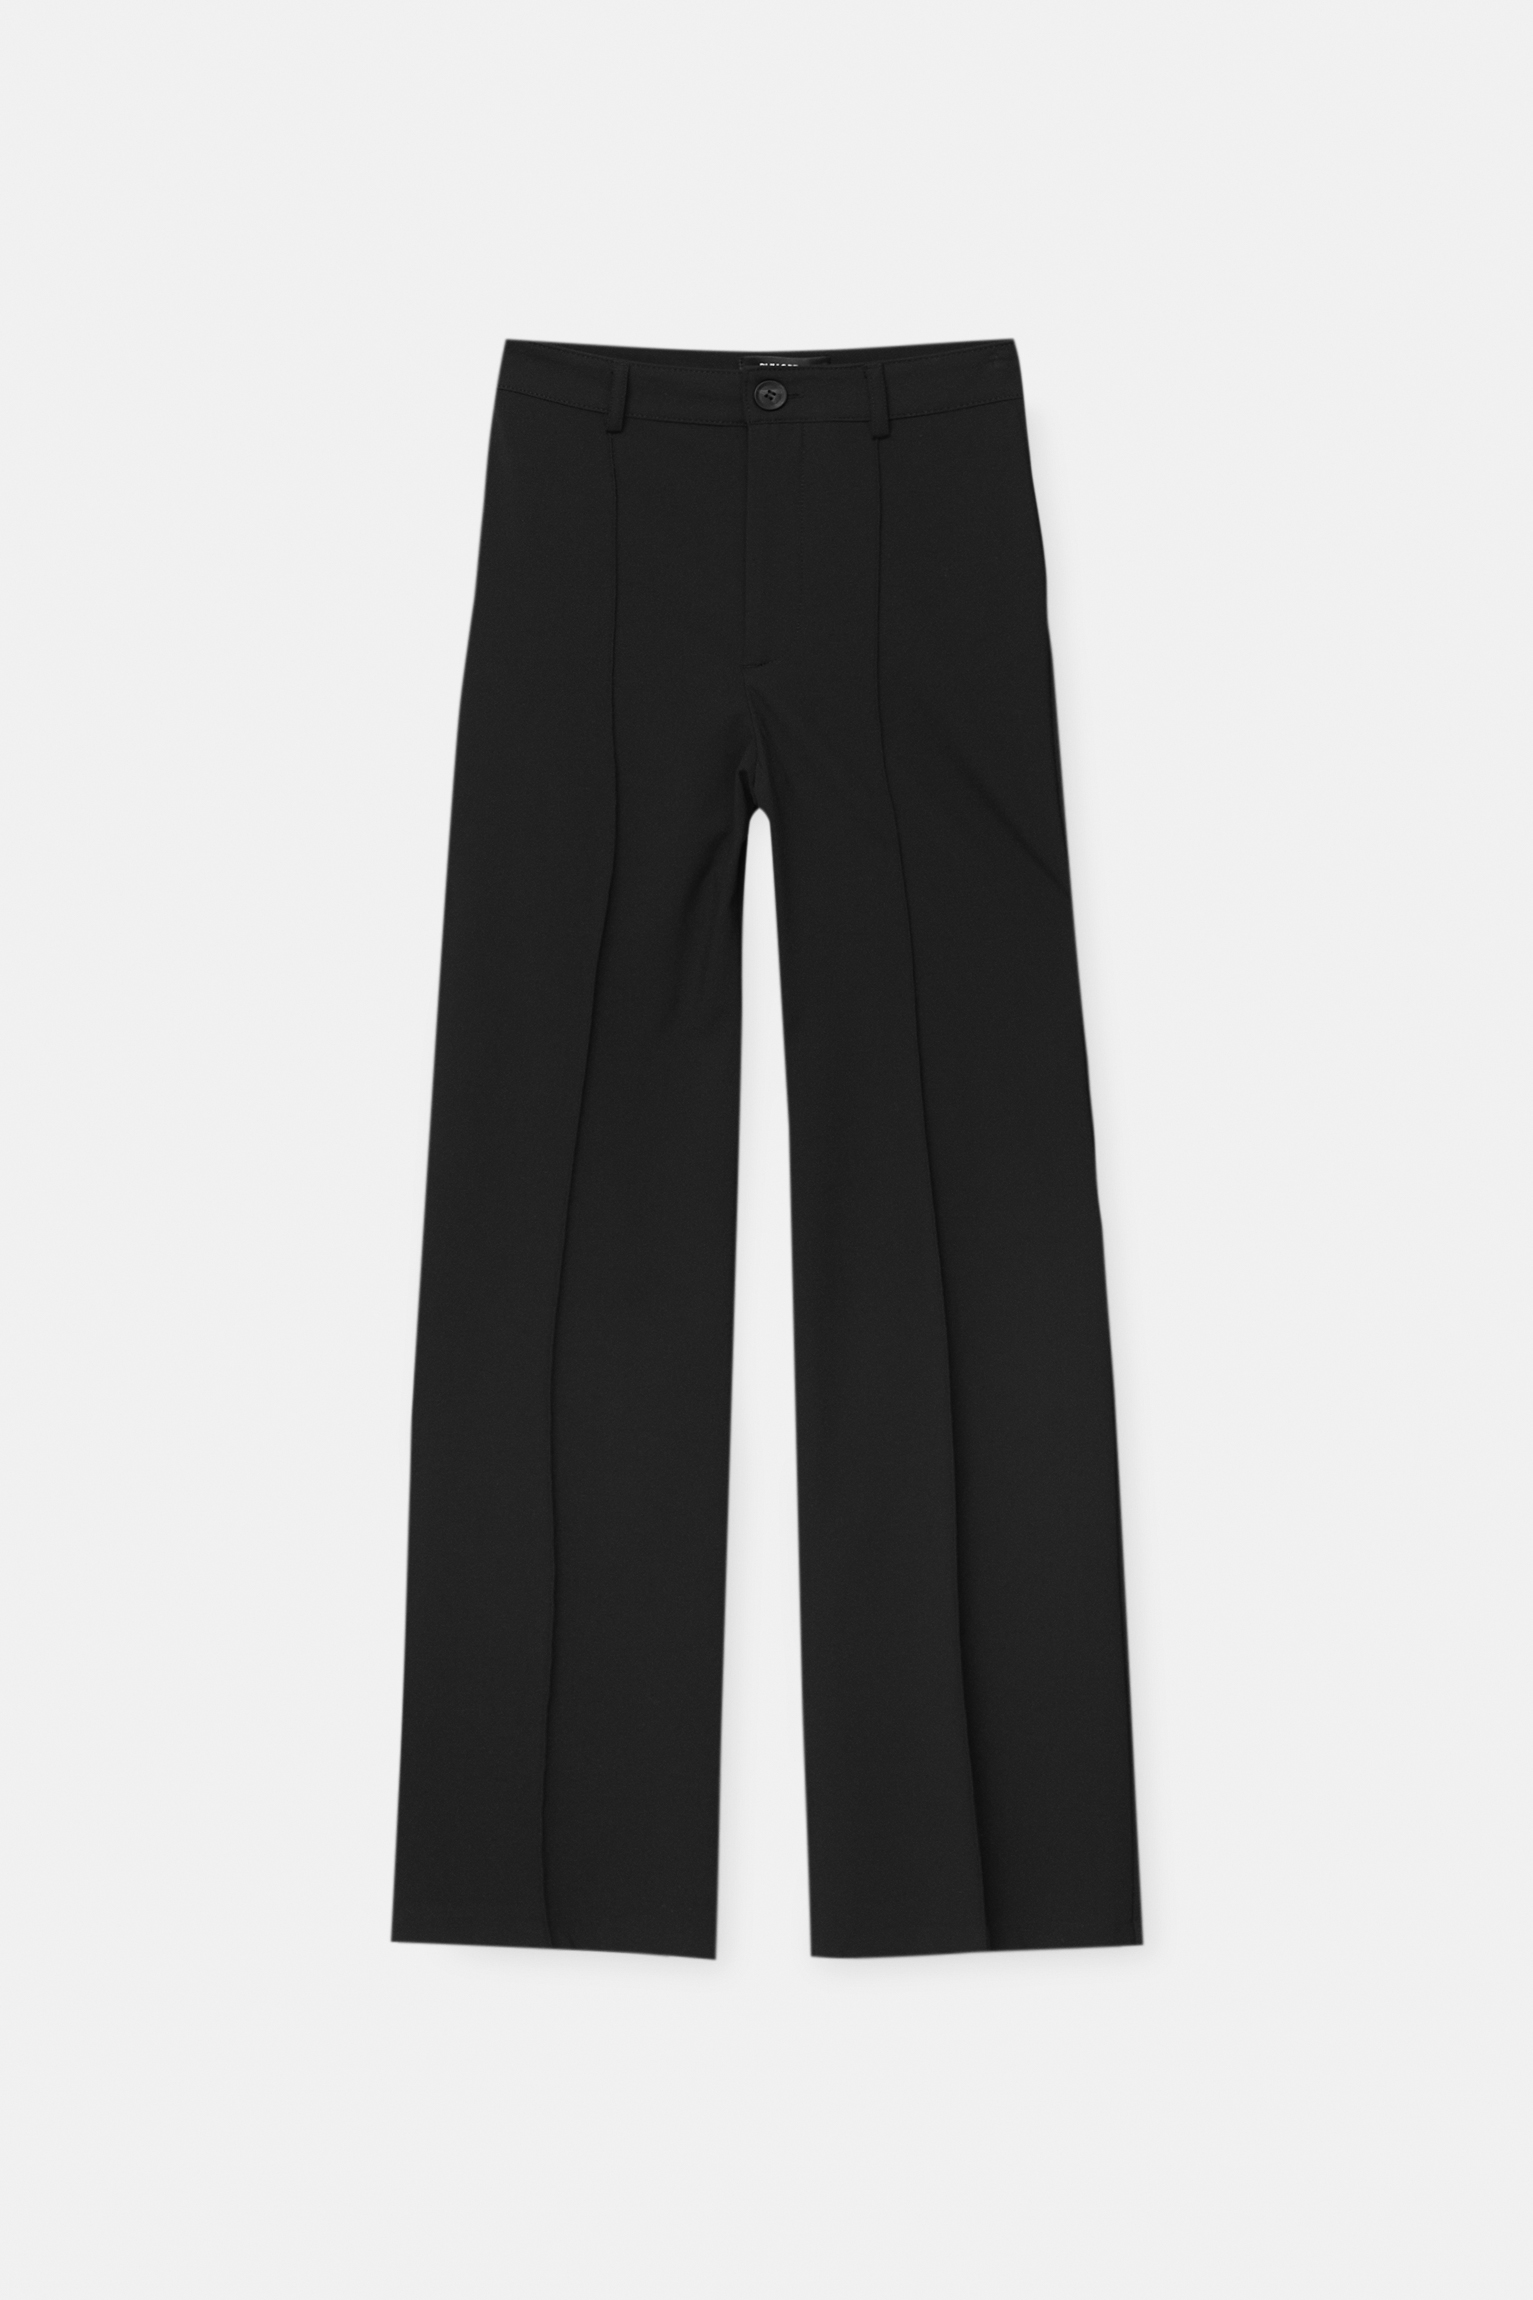 Russell Athletic by P&B colour block trousers - PULL&BEAR